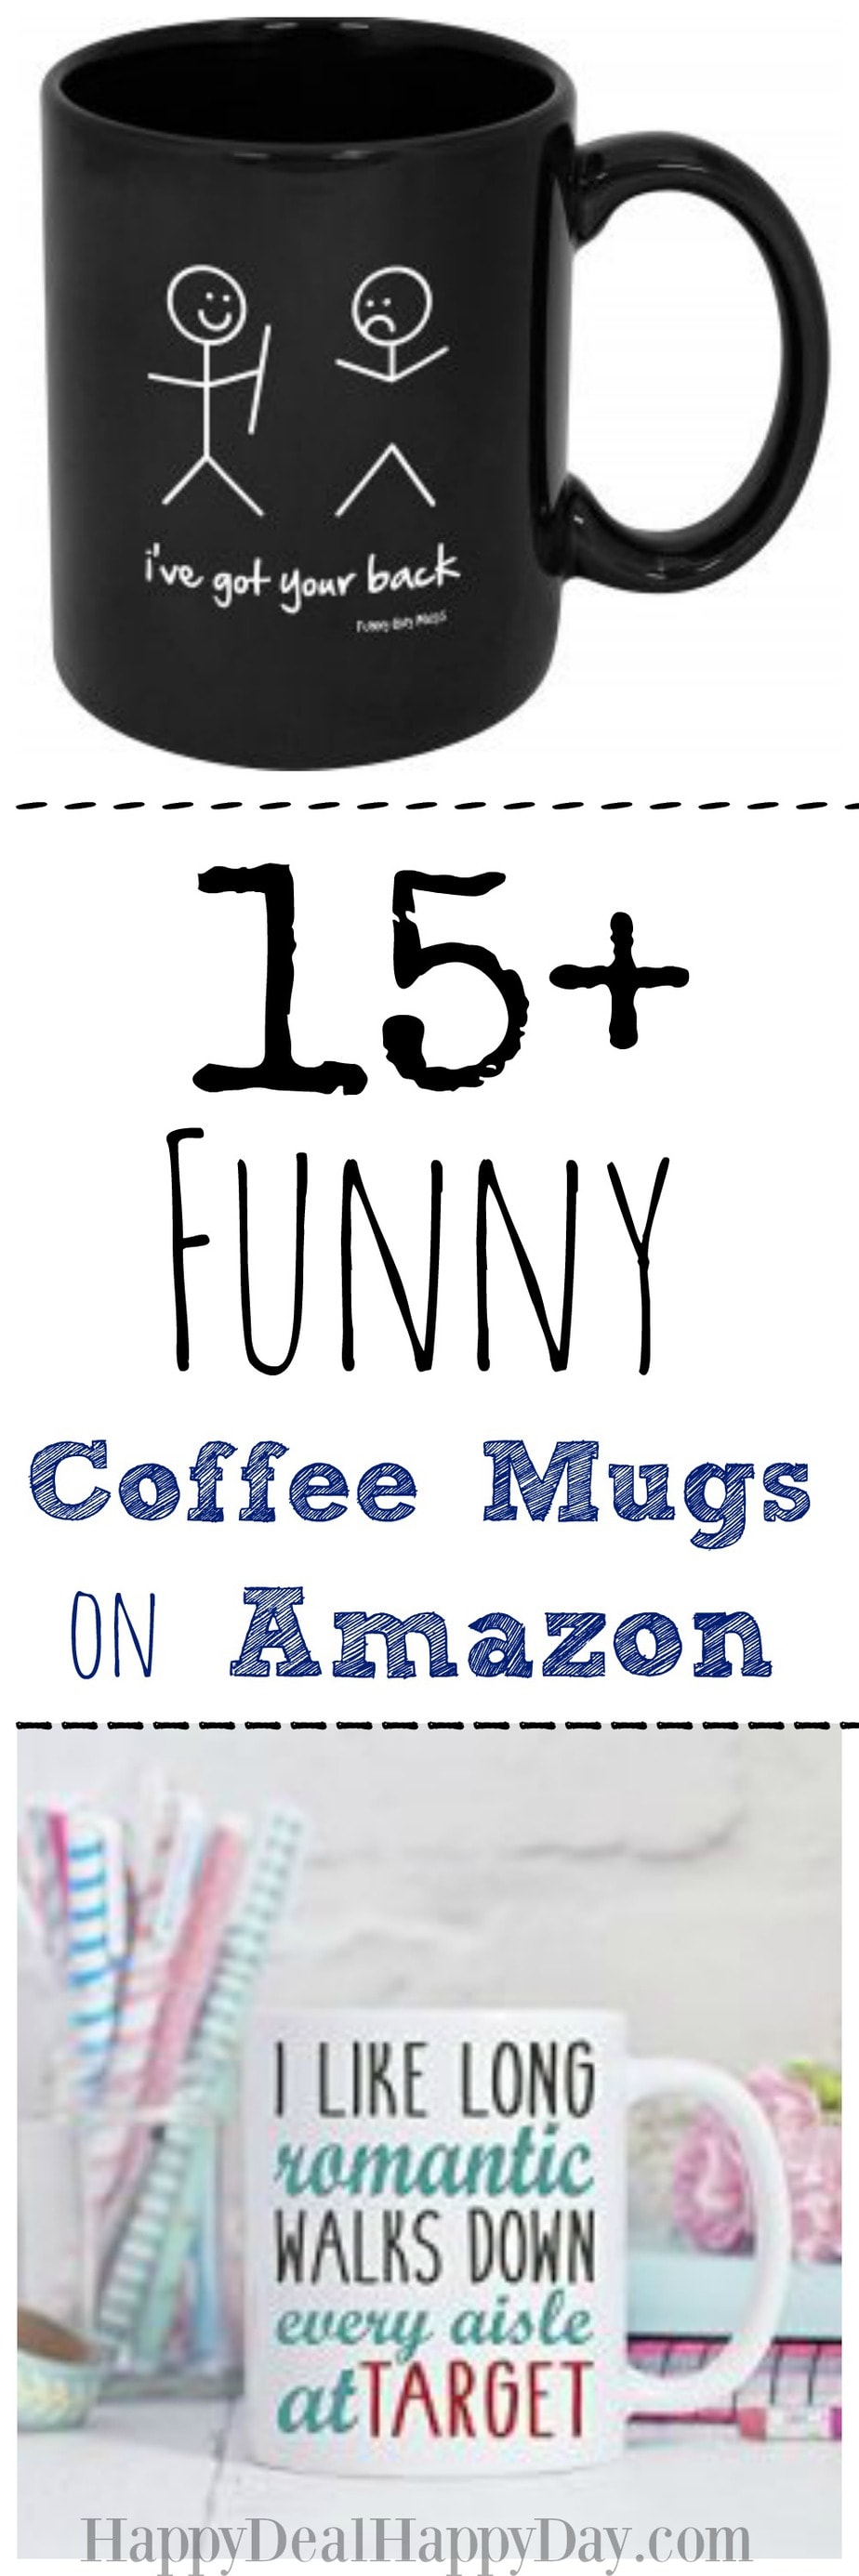 List of 15+ Funny Coffee Mugs You Can Find On Amazon